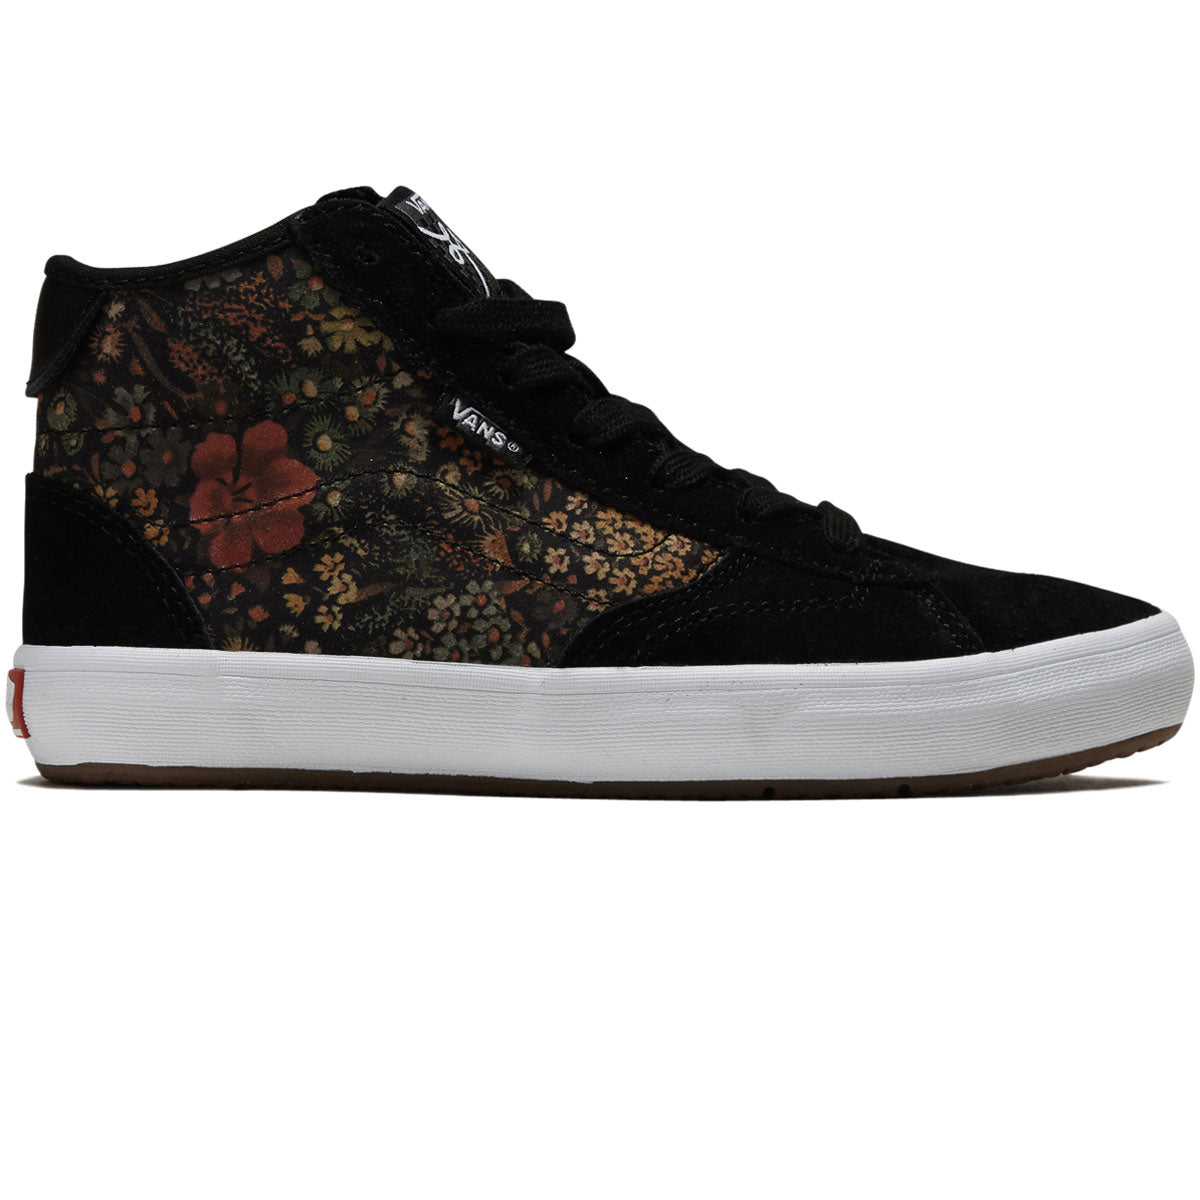 Vans Youth Little Lizzie Shoes - Black/White/Multi image 1